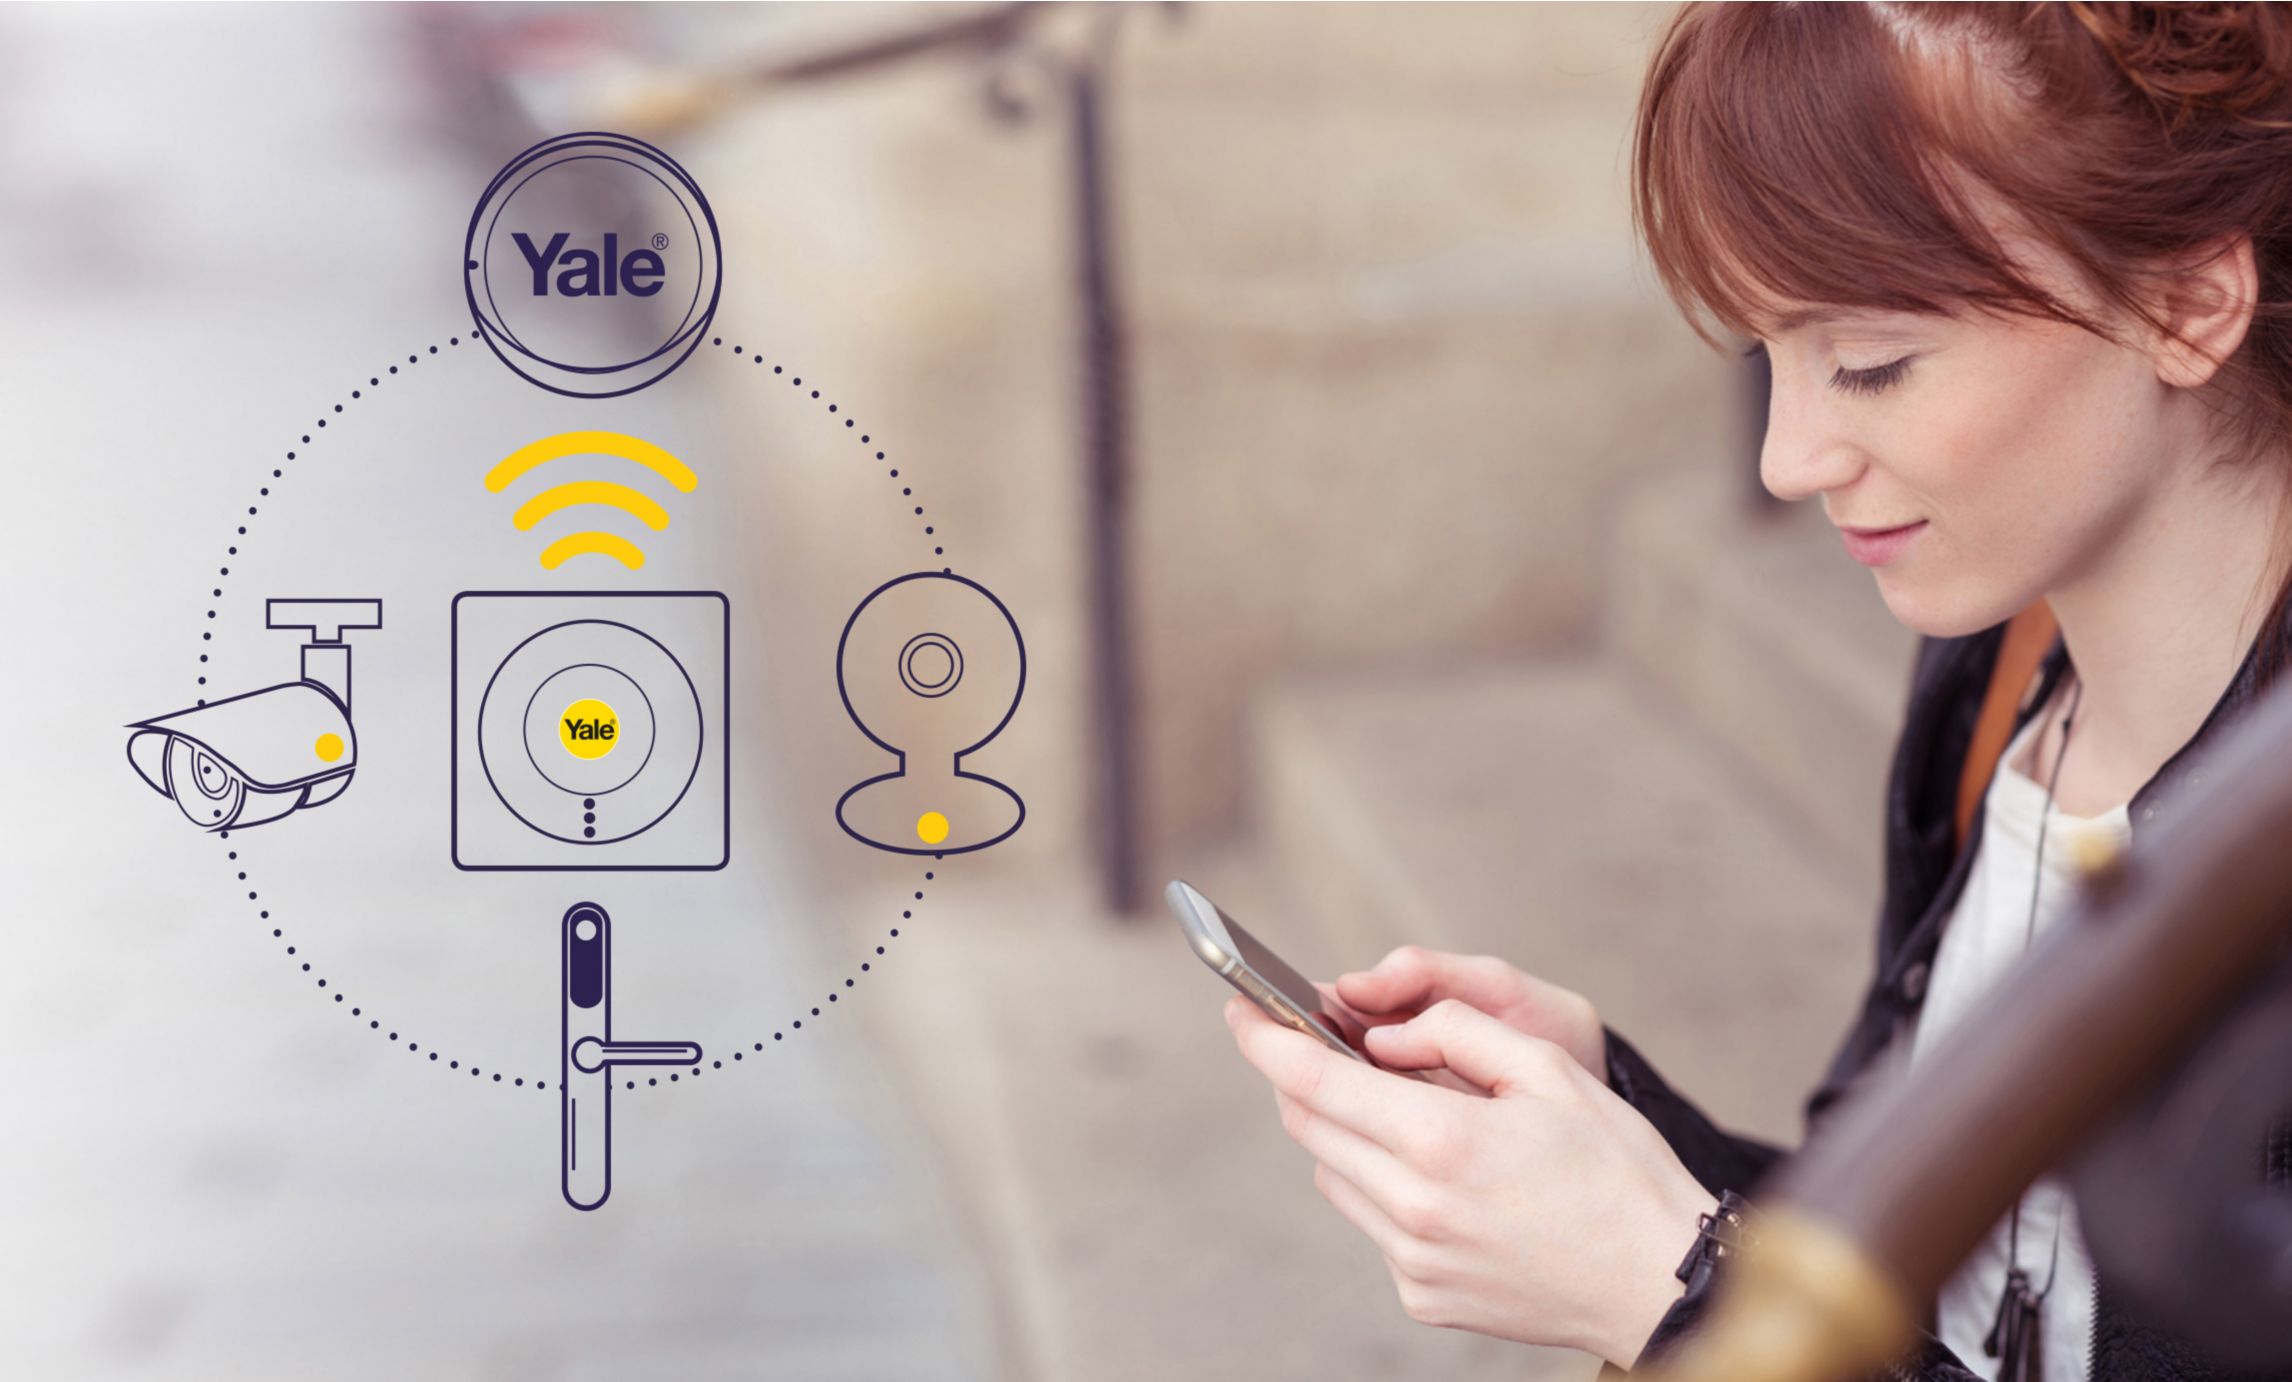 Yale Seamless Connectivity